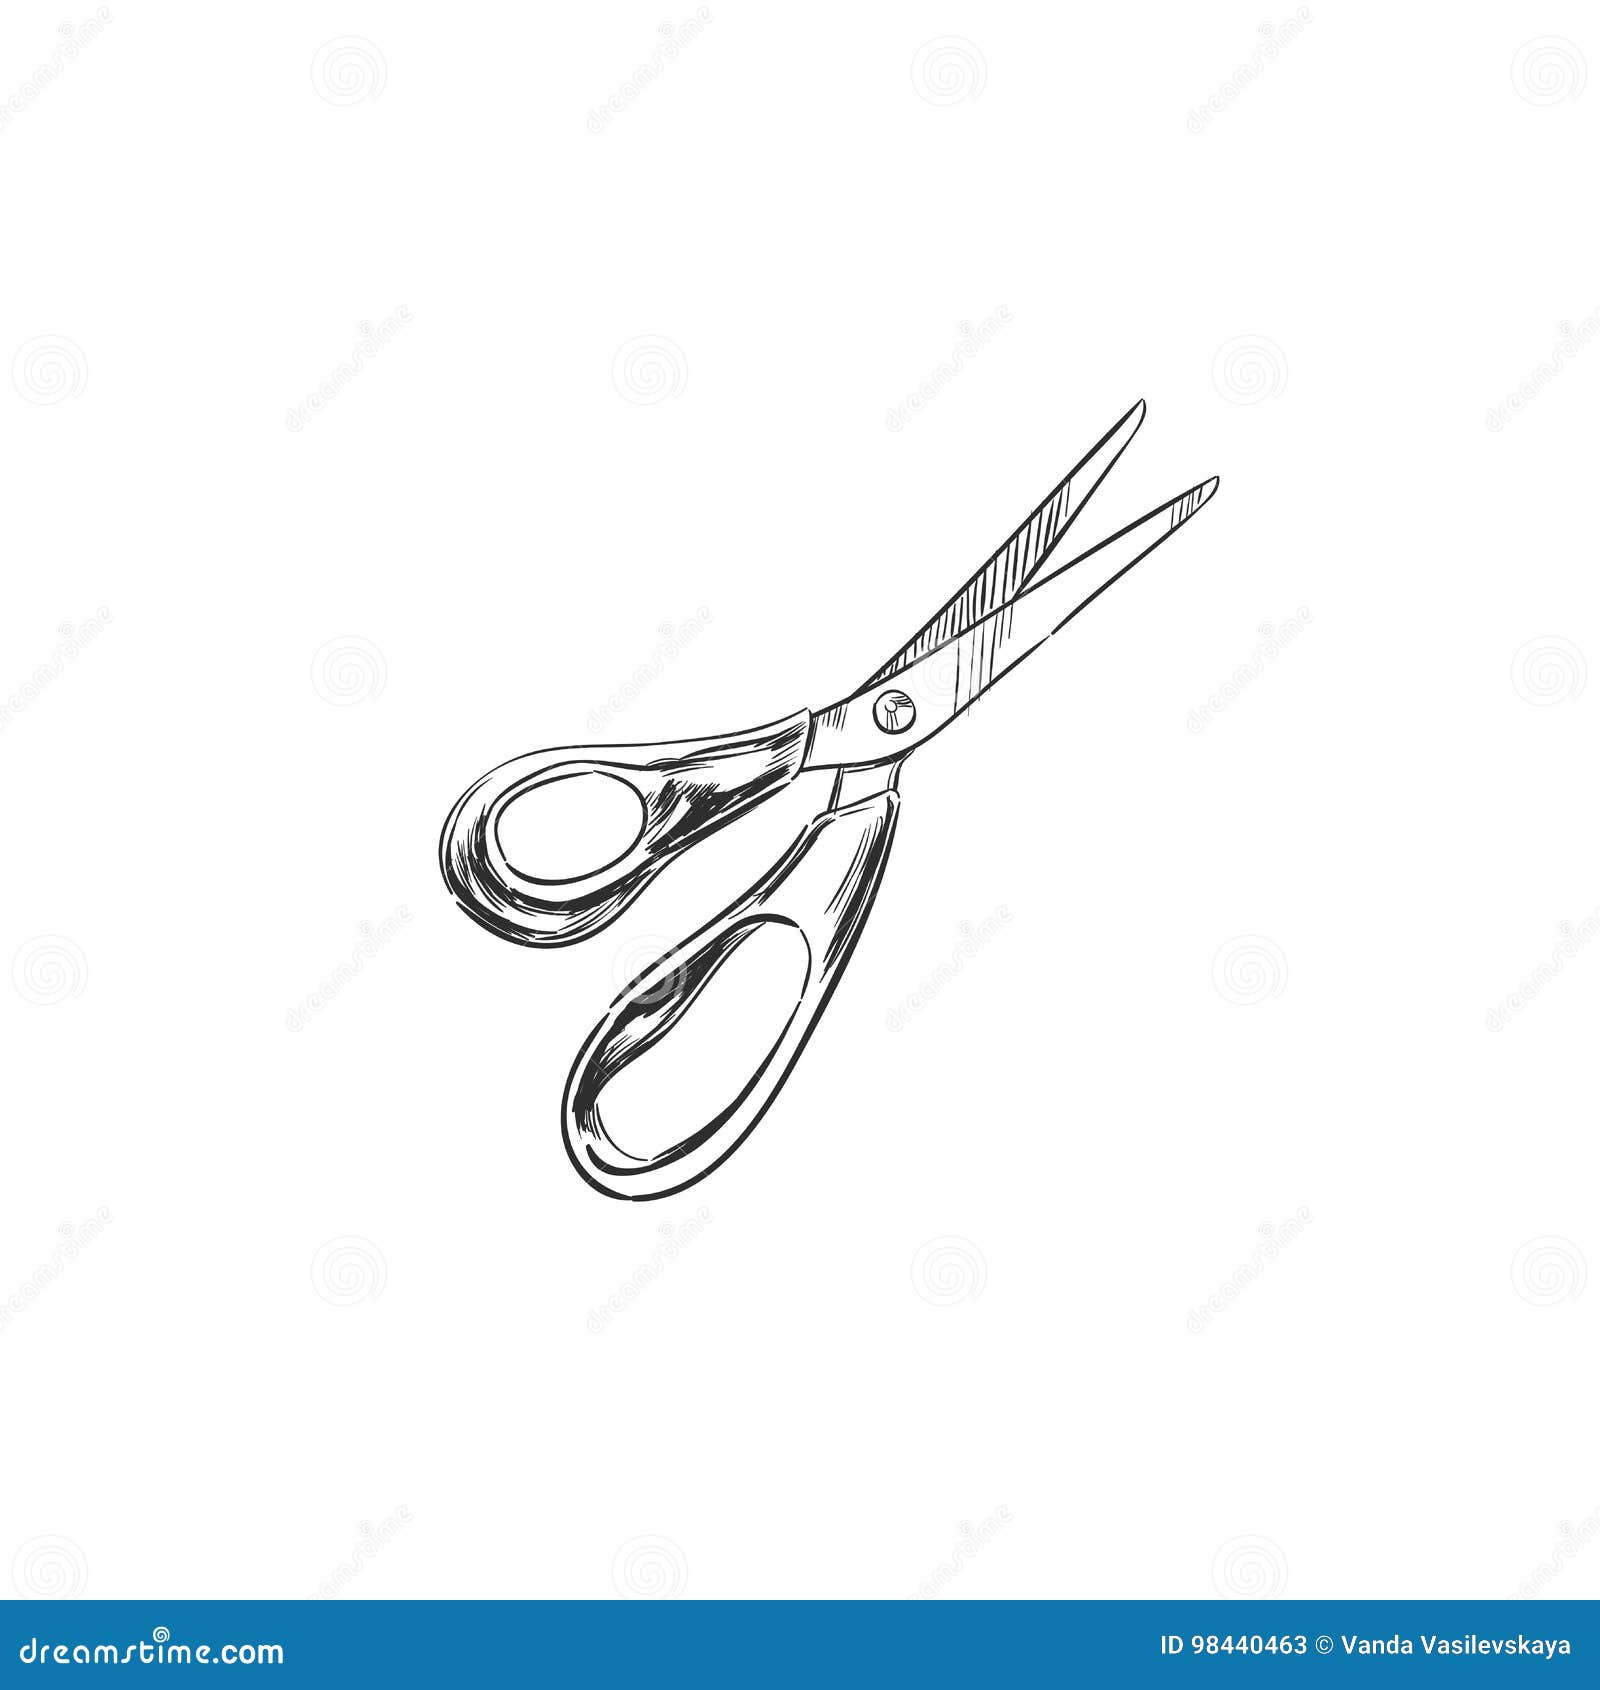 Scissors Sketch Clipart Transparent PNG Hd Scissors Sketch Illustration  Vector Tool Tool White Element PNG Image For Free Download